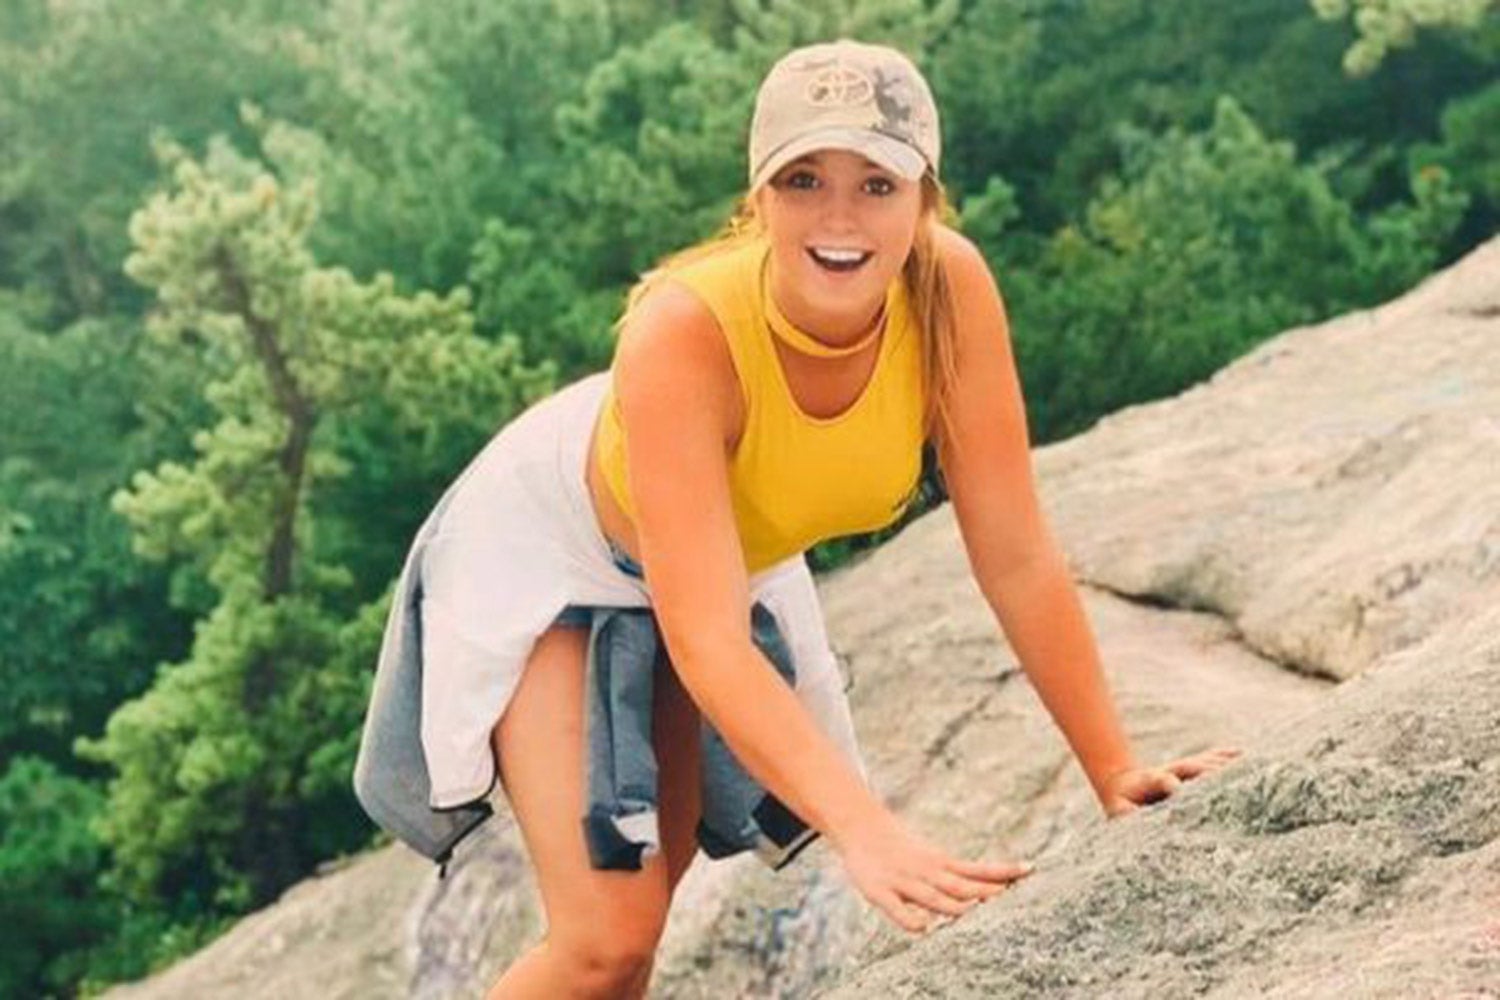 Lindsey Partridge, 22, died while on vacation in Florida during a boat accident after she was knocked overboard by a wave.